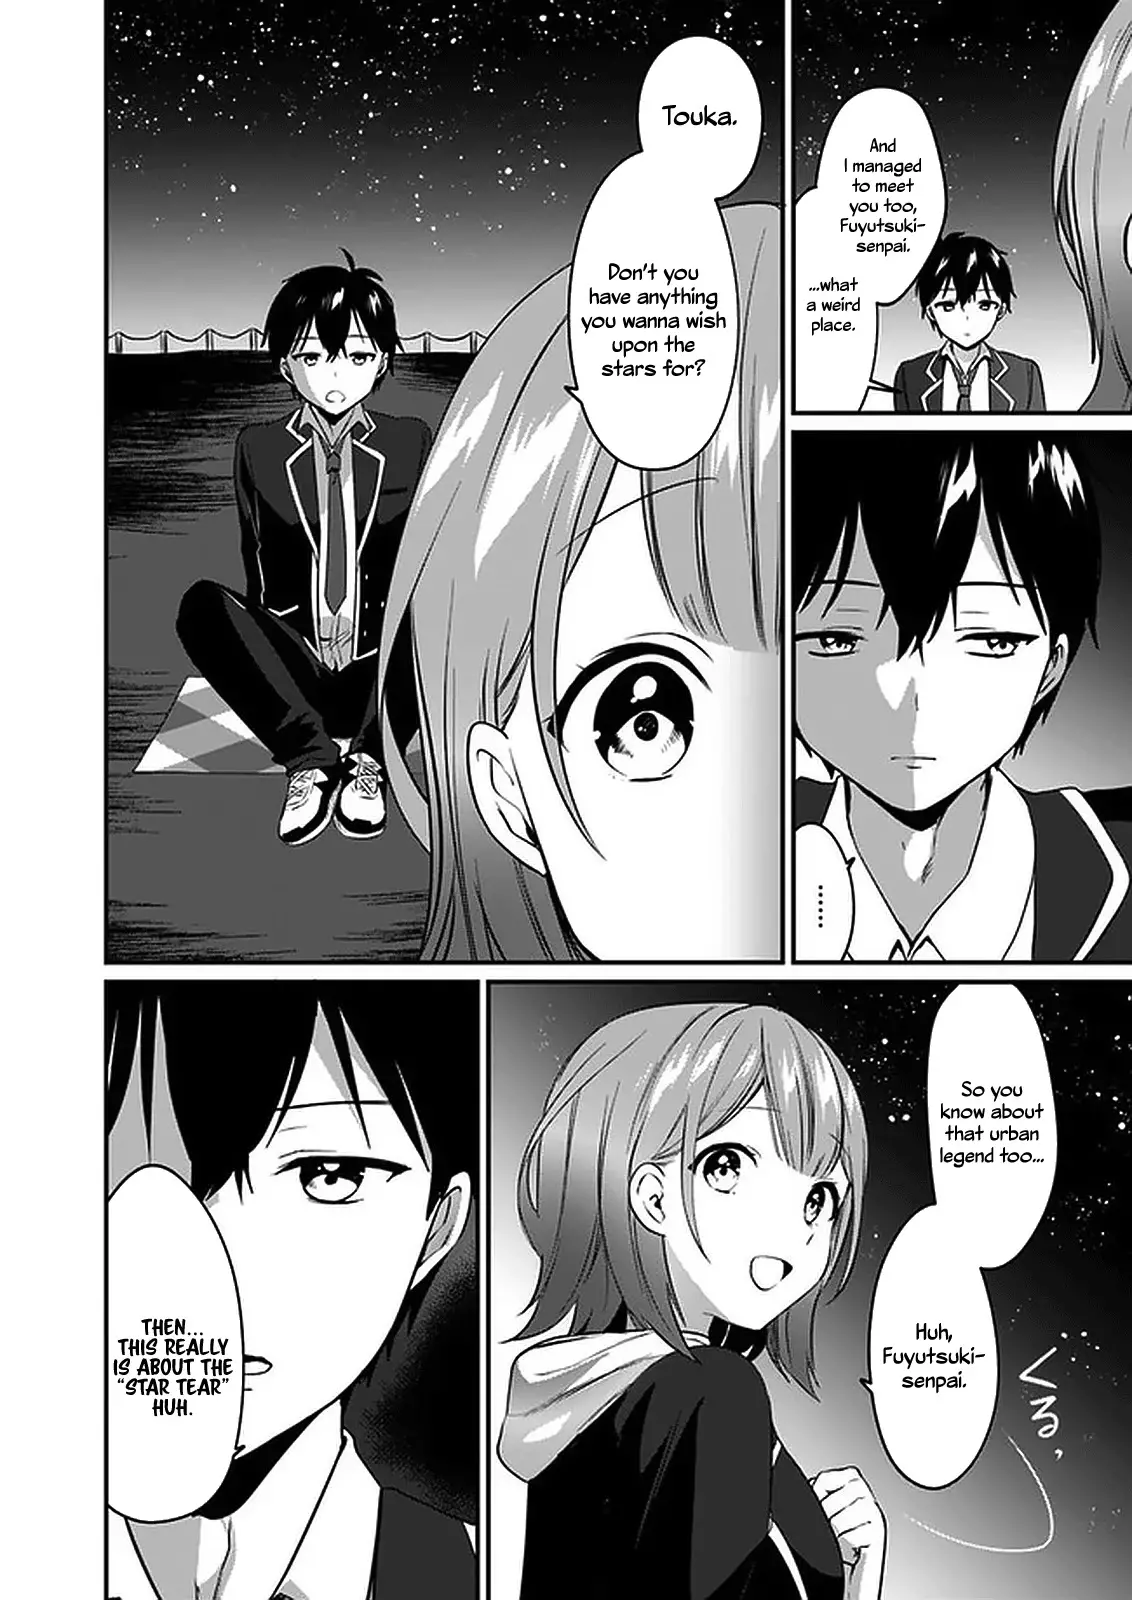 Right Now, She's Still My Childhood Friend's Sister. - 1 page 22